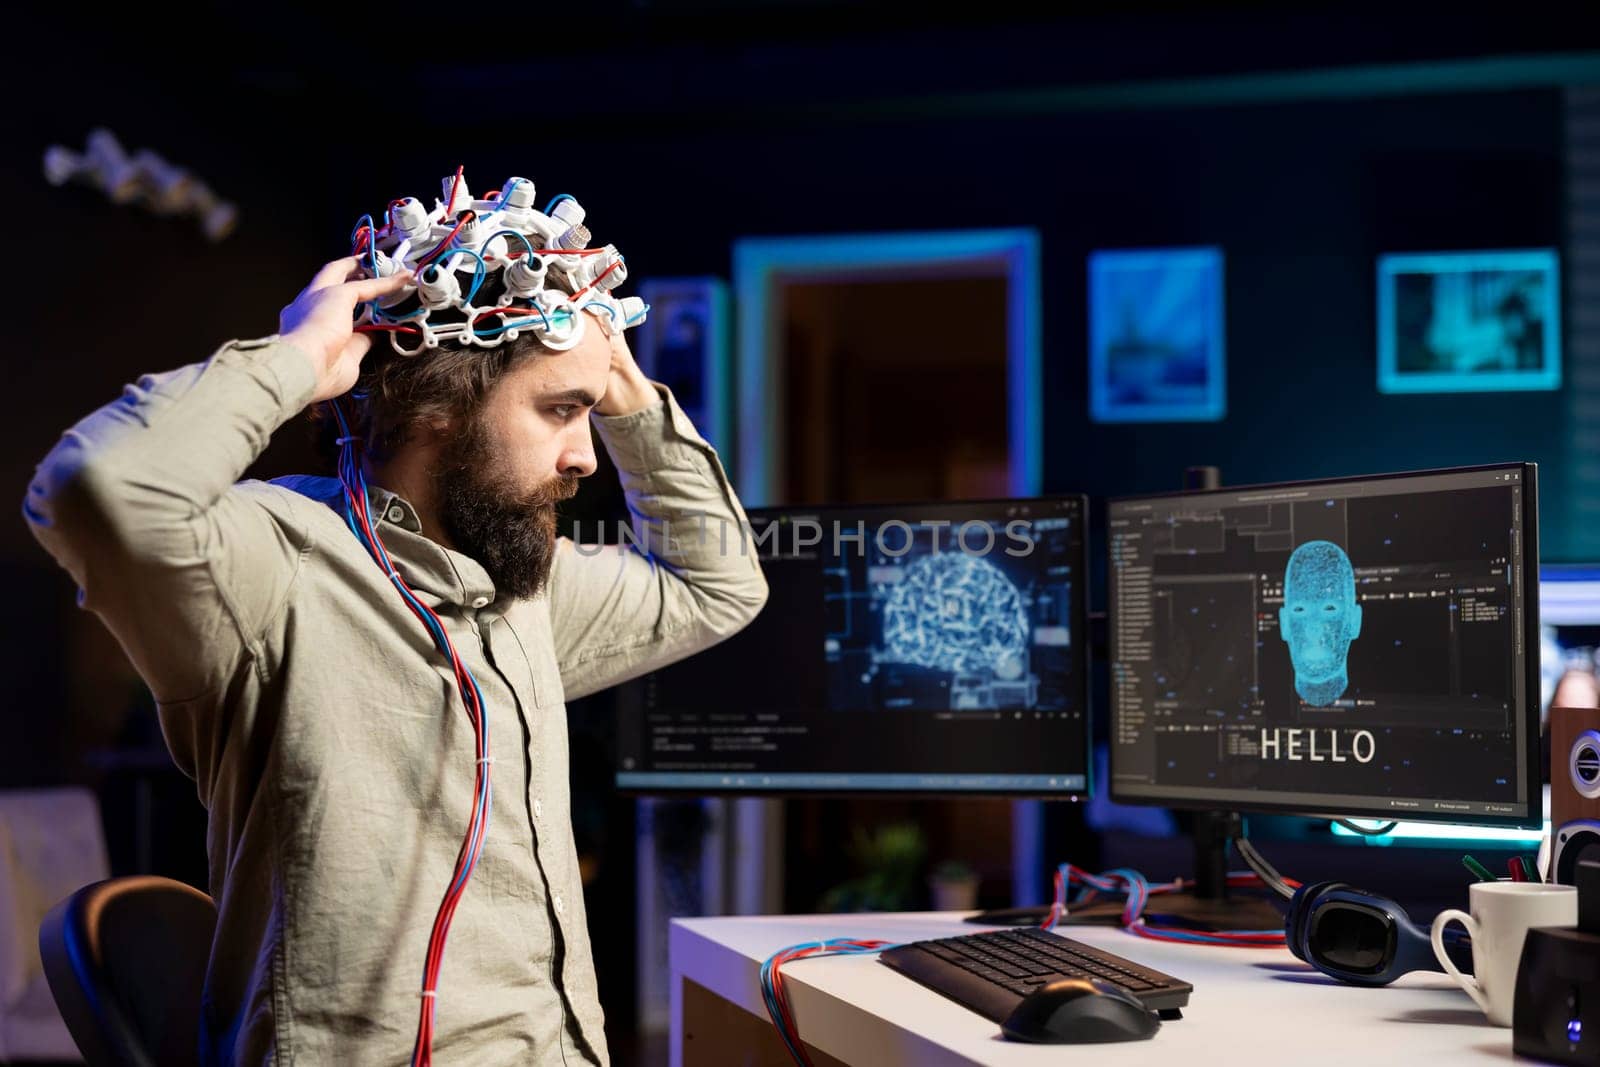 IT specialist putting EEG headset on to communicate with artificial intelligence on computer in binary code. Software engineer sending brainwave signals to sentient AI on PC using high tech device